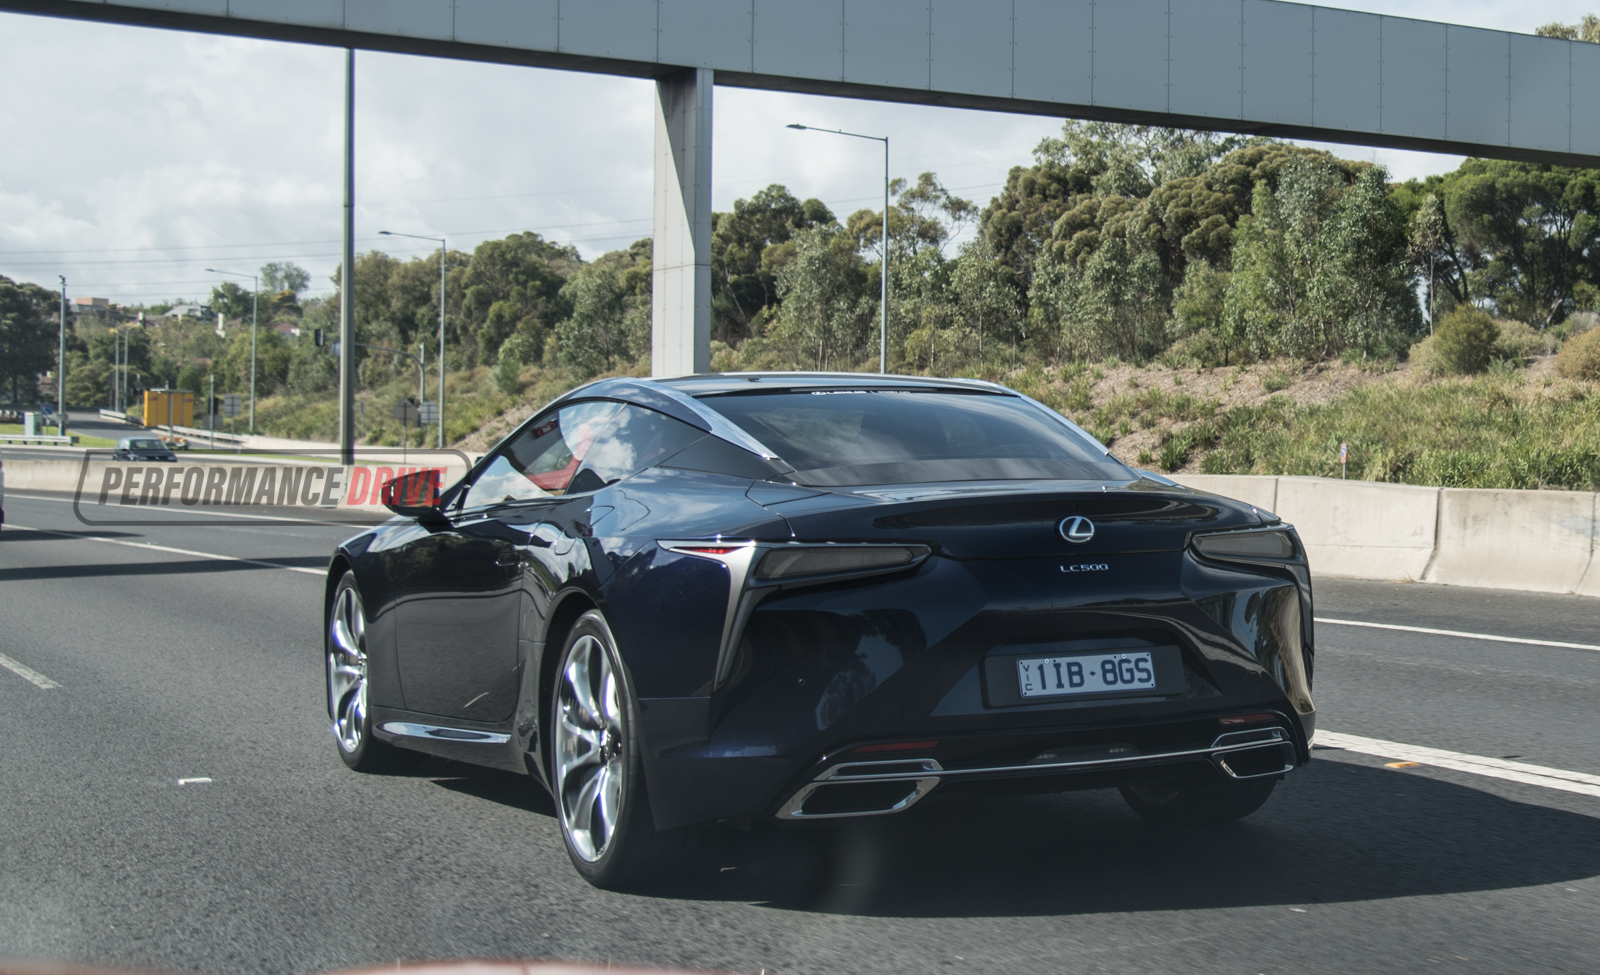 New Lexus LC 500 spotted on the streets in Australia